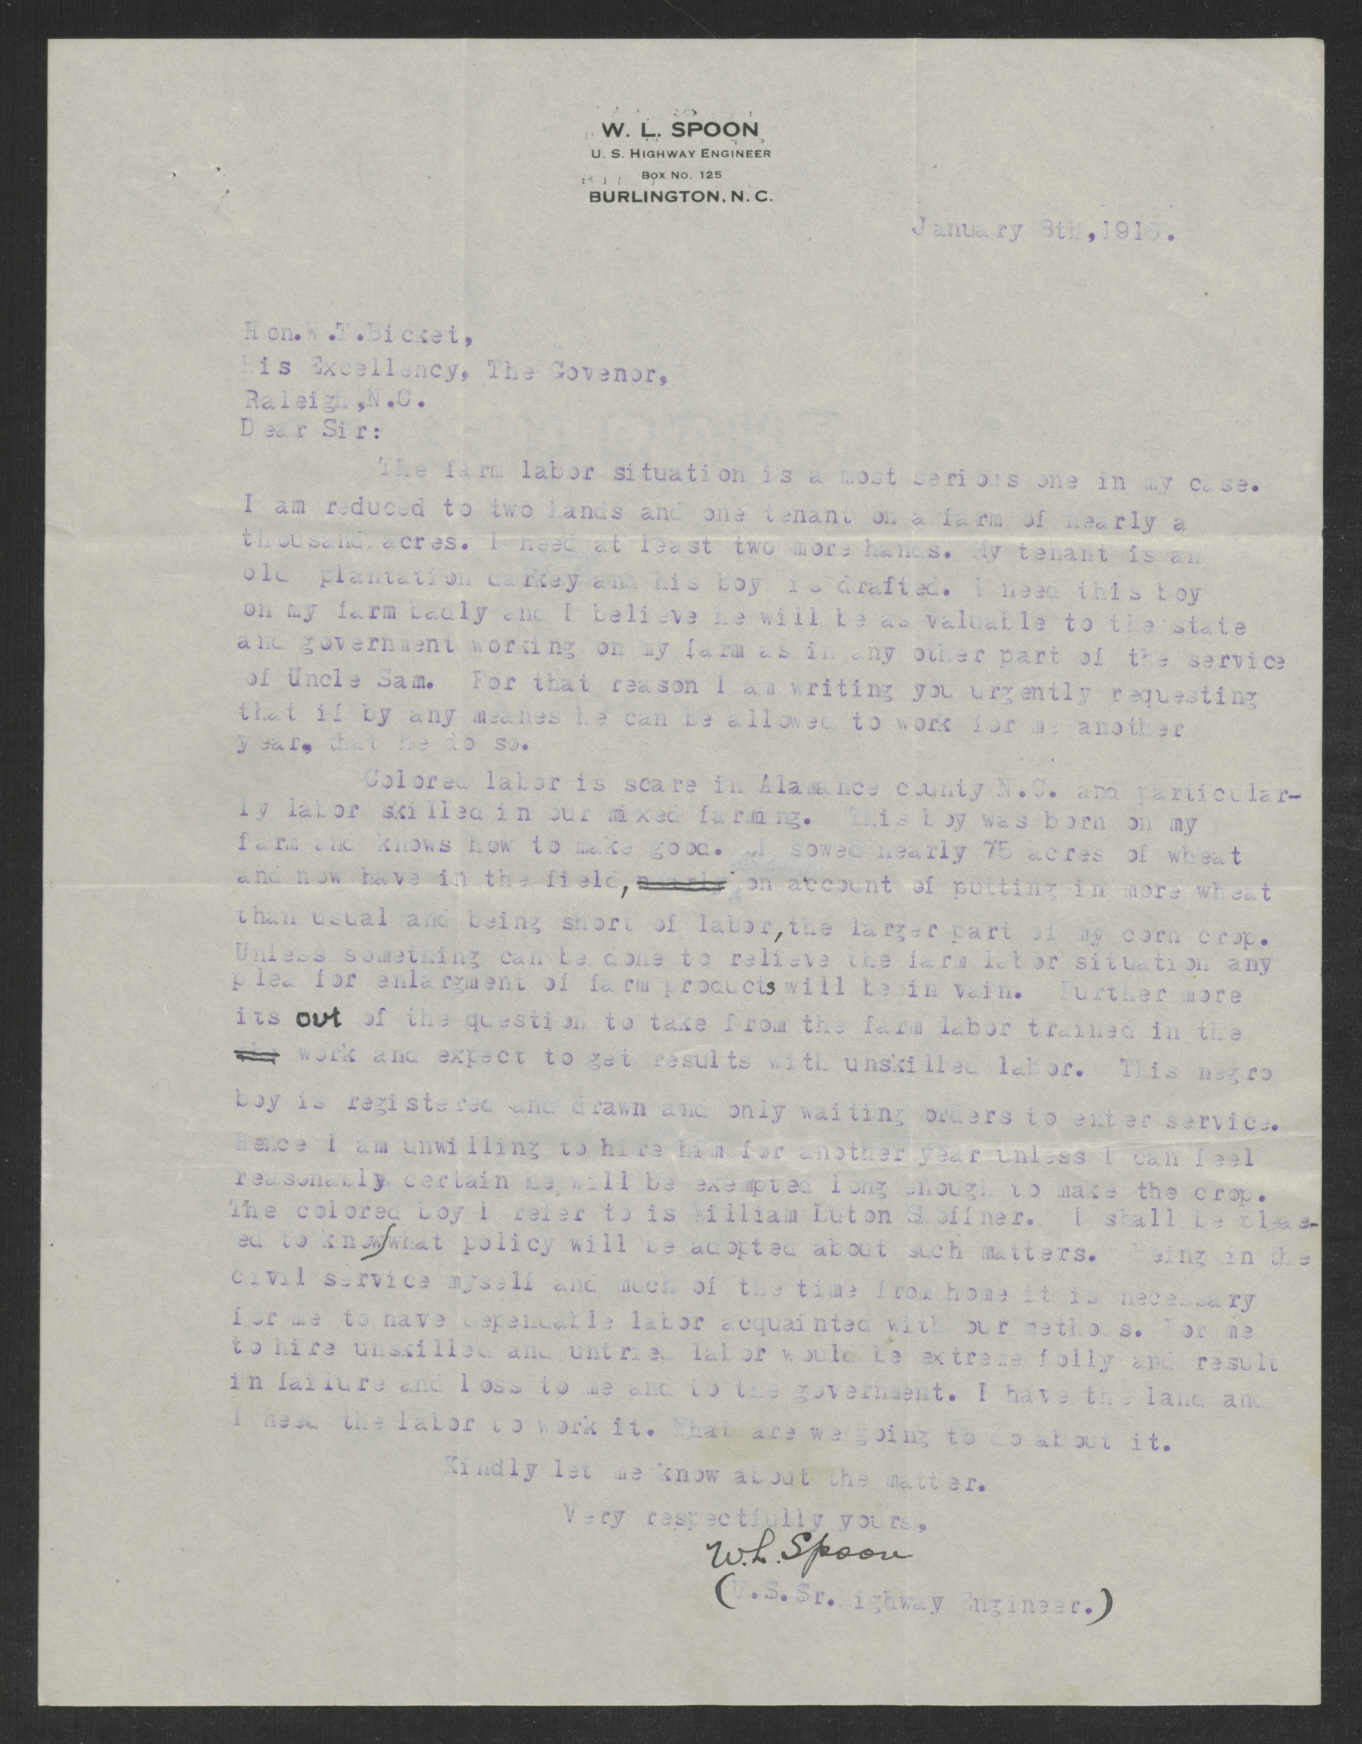 Letter from William L. Spoon to Thomas W. Bickett, January 8, 1918